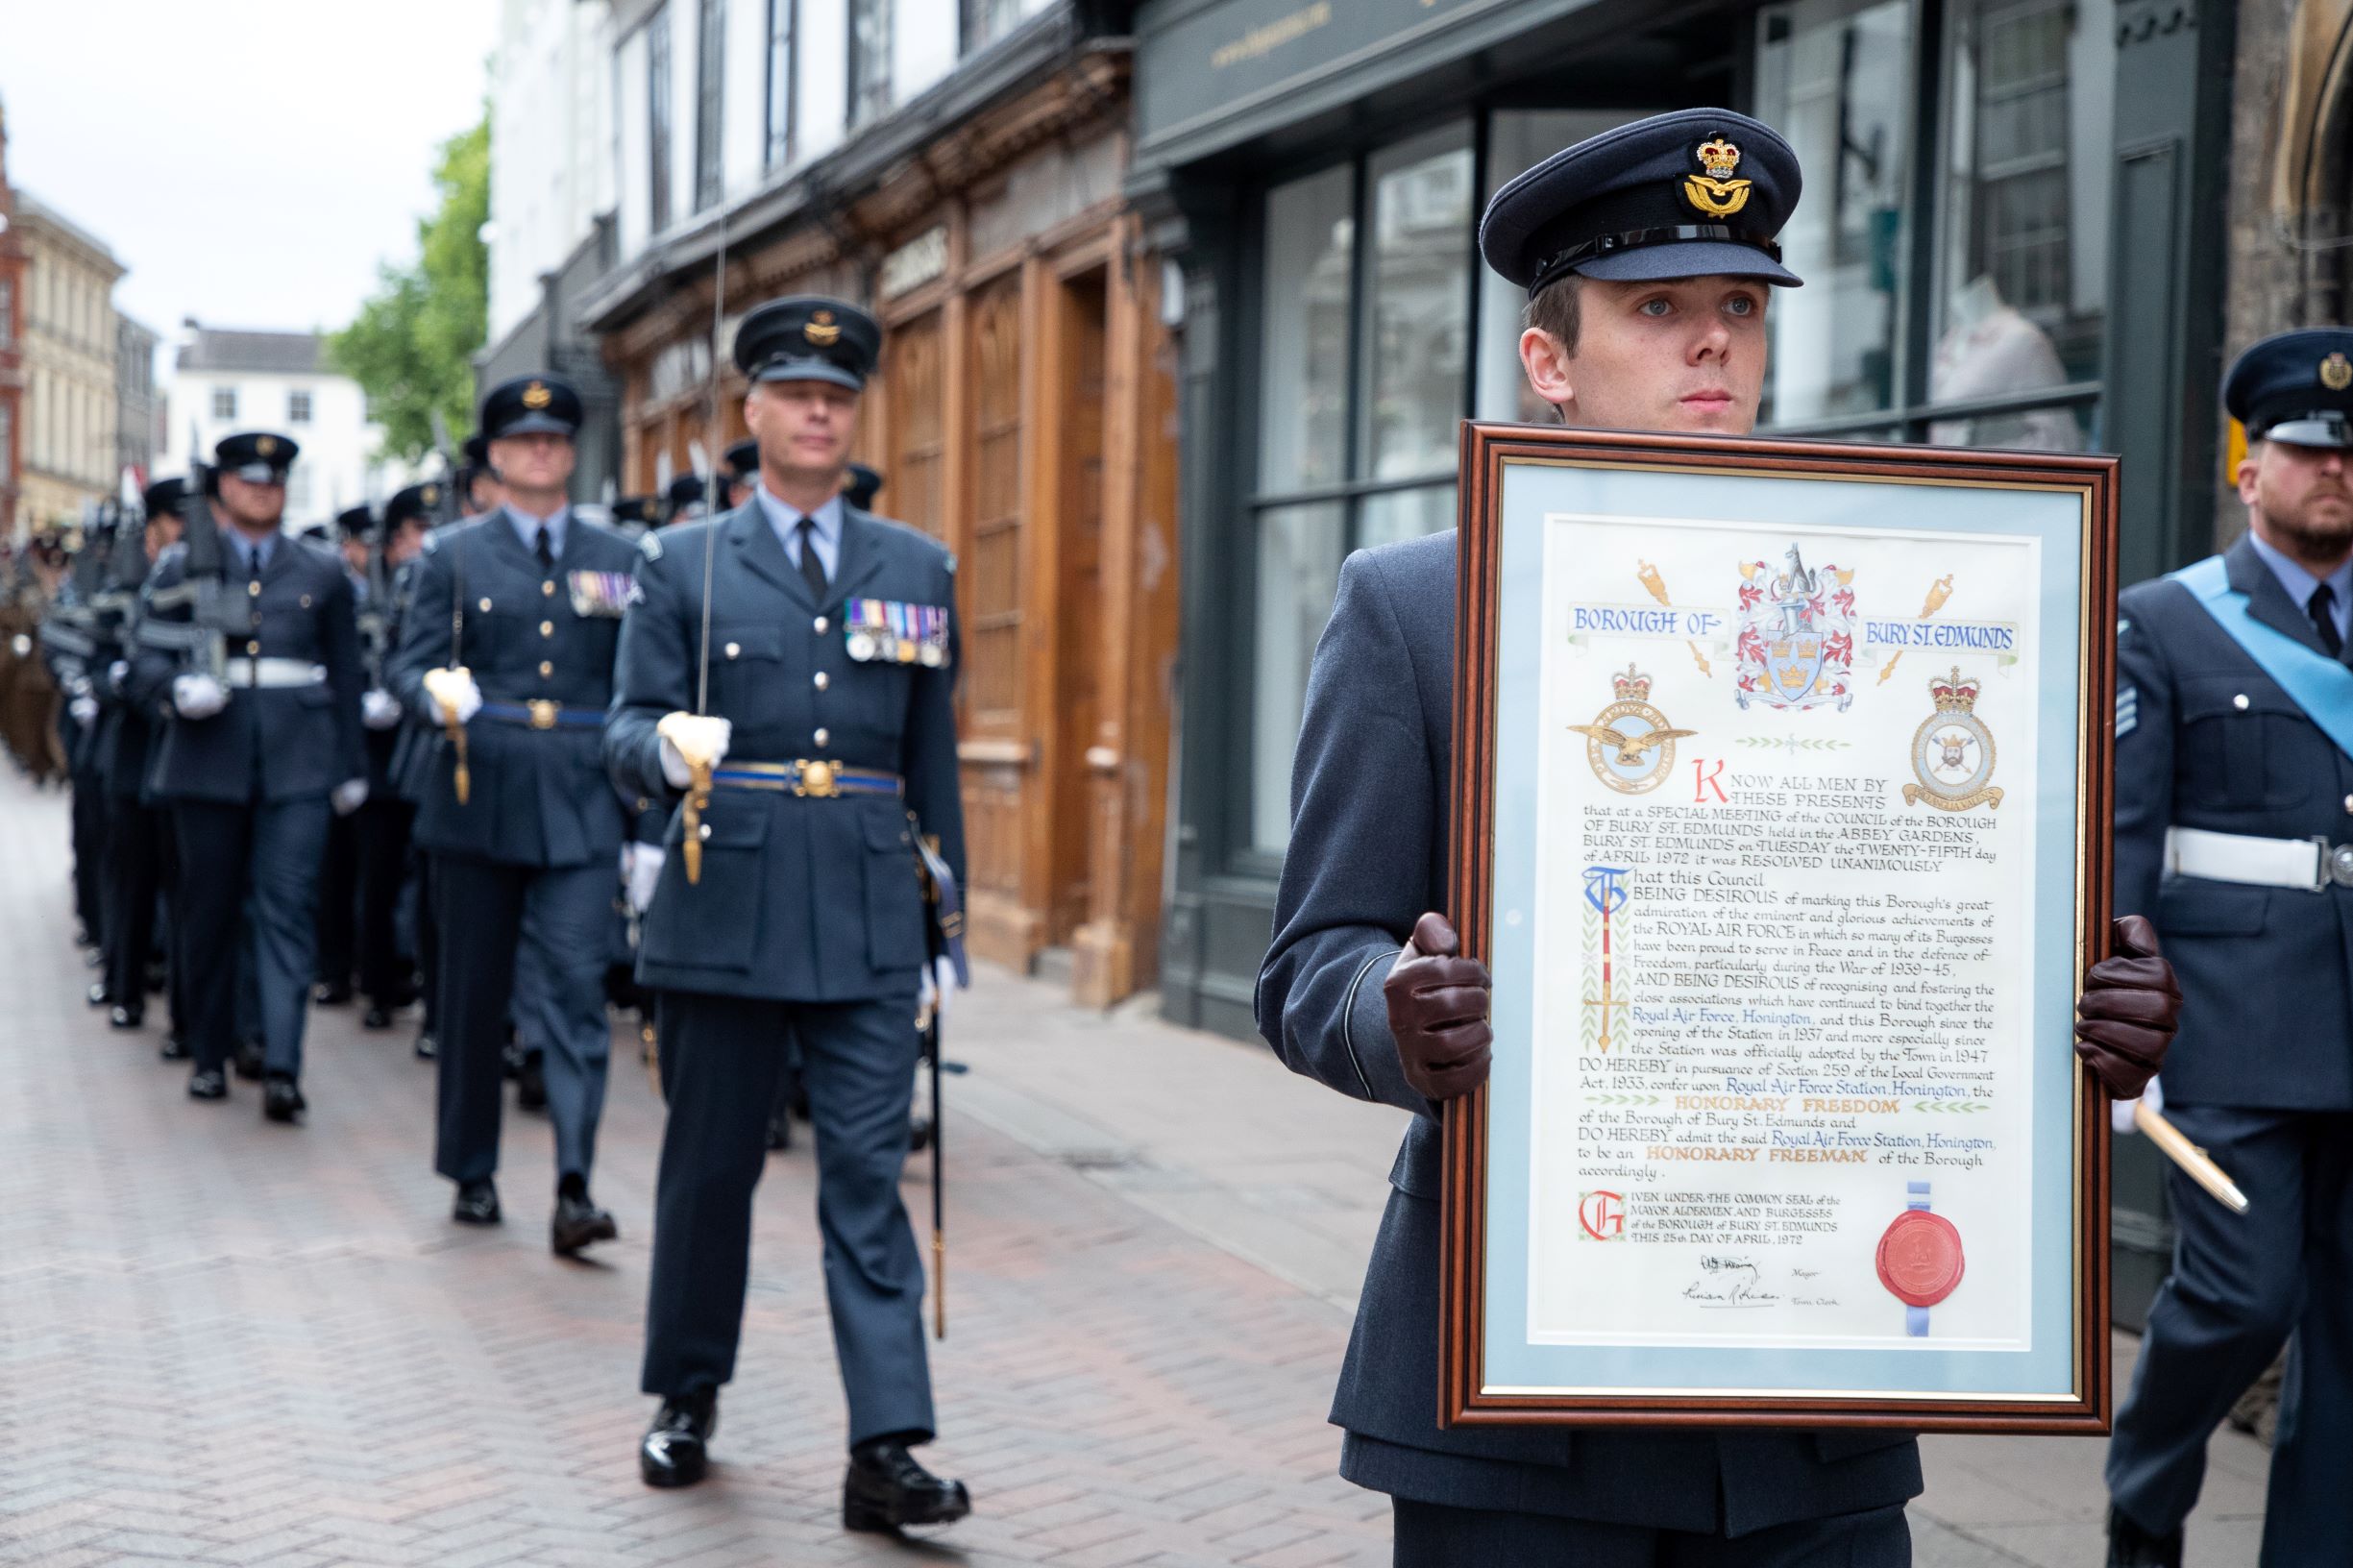 RAF Aviators parade through streets, with framed certificate of award.